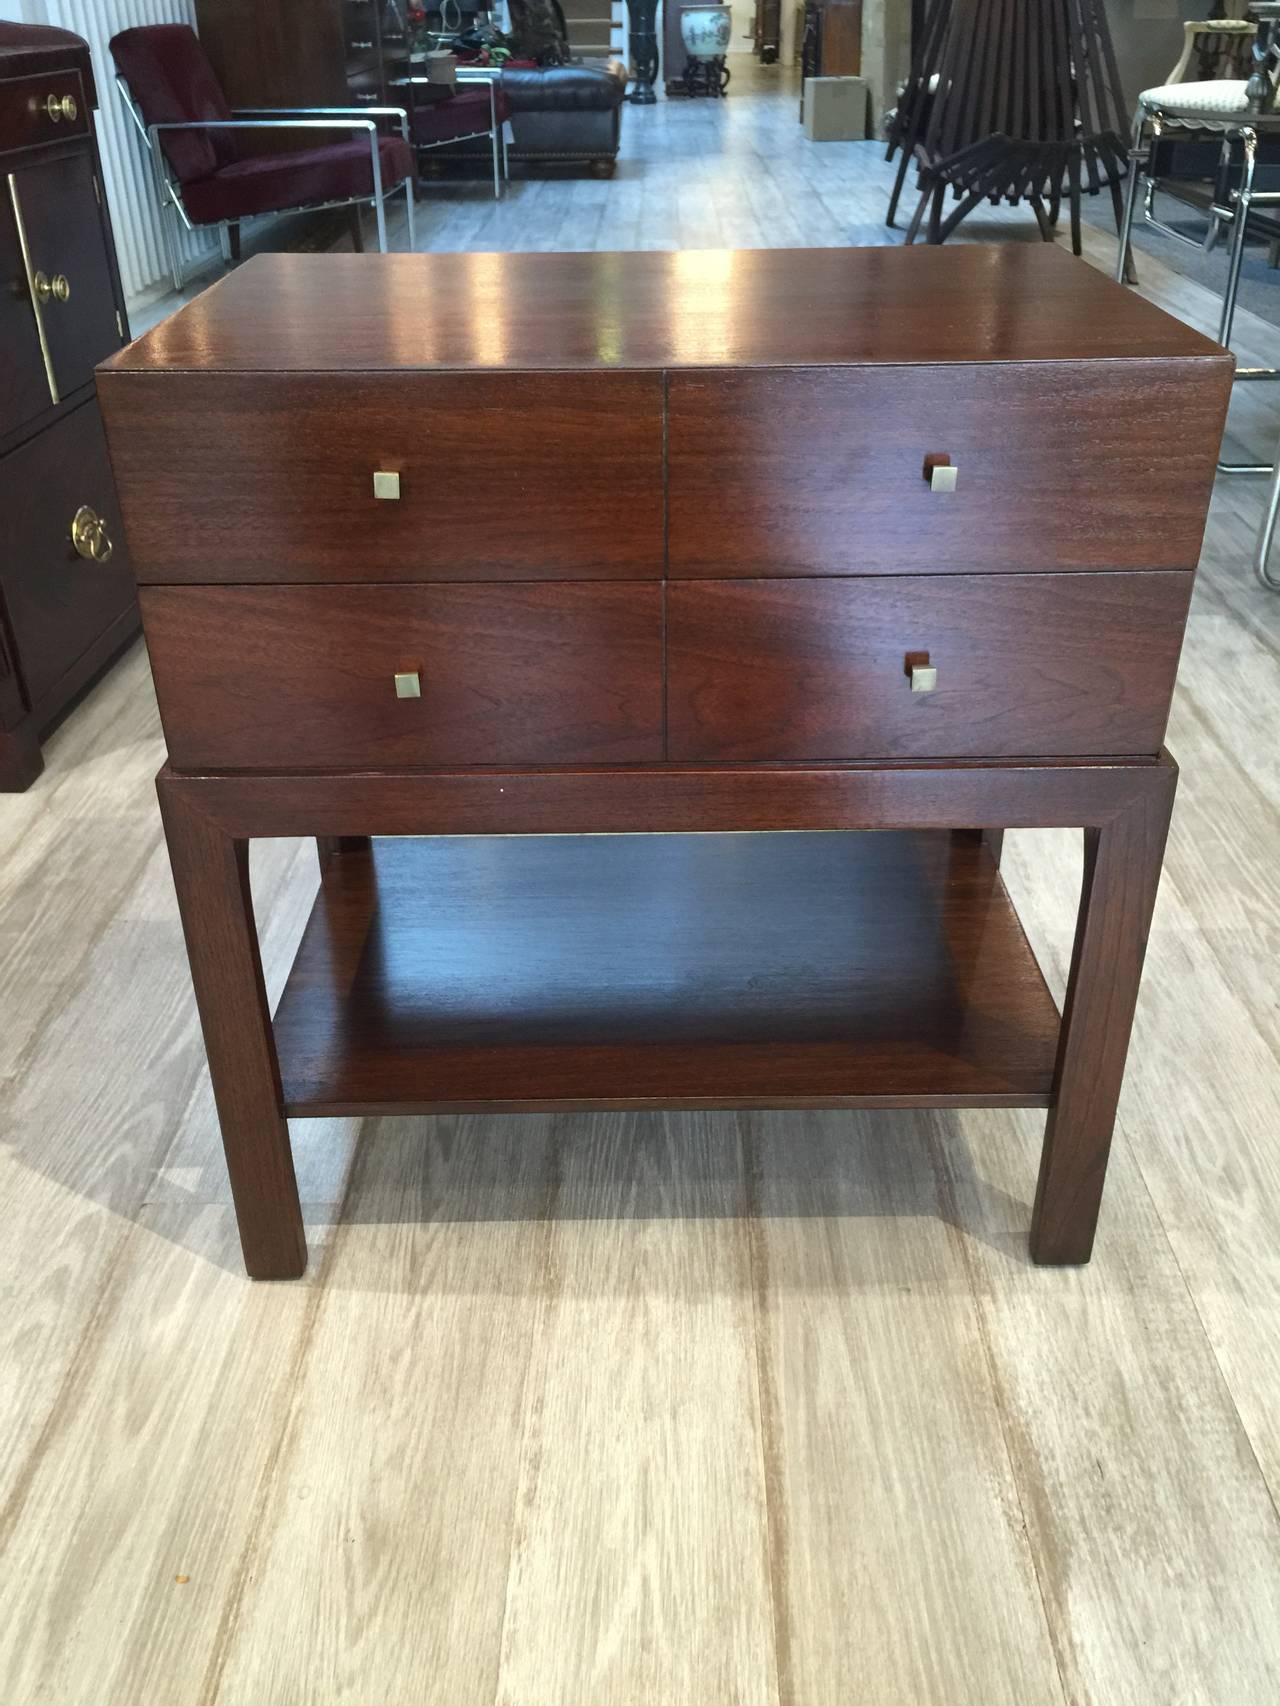 A pair of handsome Parzinger style nightstands by Albert Furniture Company. Rich mahogany and brass knobs.